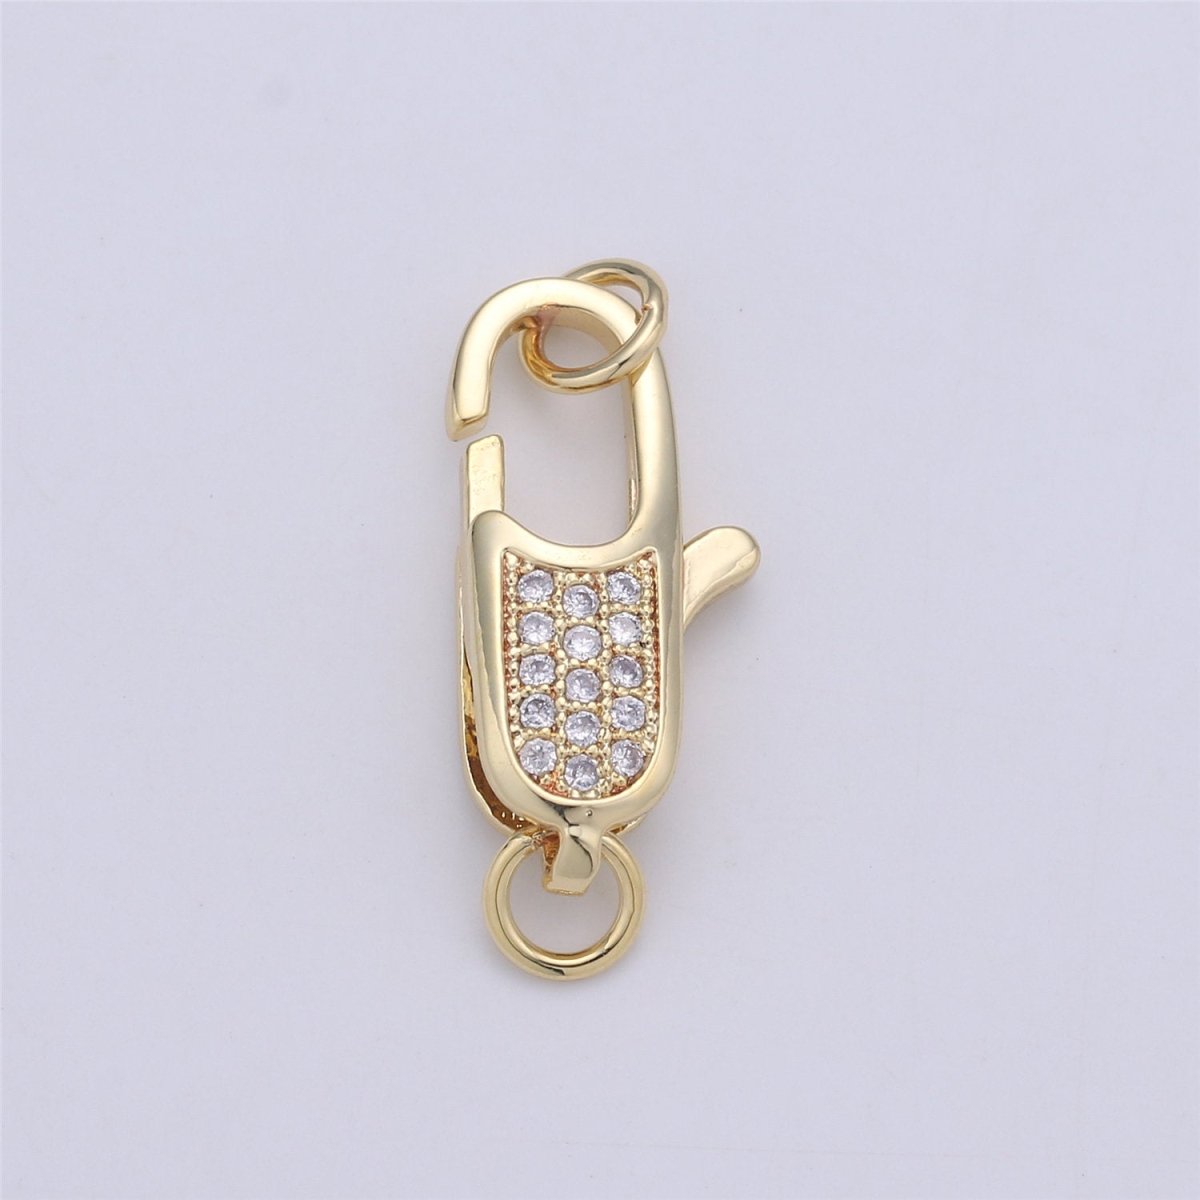 14K Gold Filled Rectangle Lobster Clasp for Necklace Bracelet Jewelry Making Supplies Chain Findings Micro Pave Clasp K-382 K-821 K-866 K-873 - DLUXCA